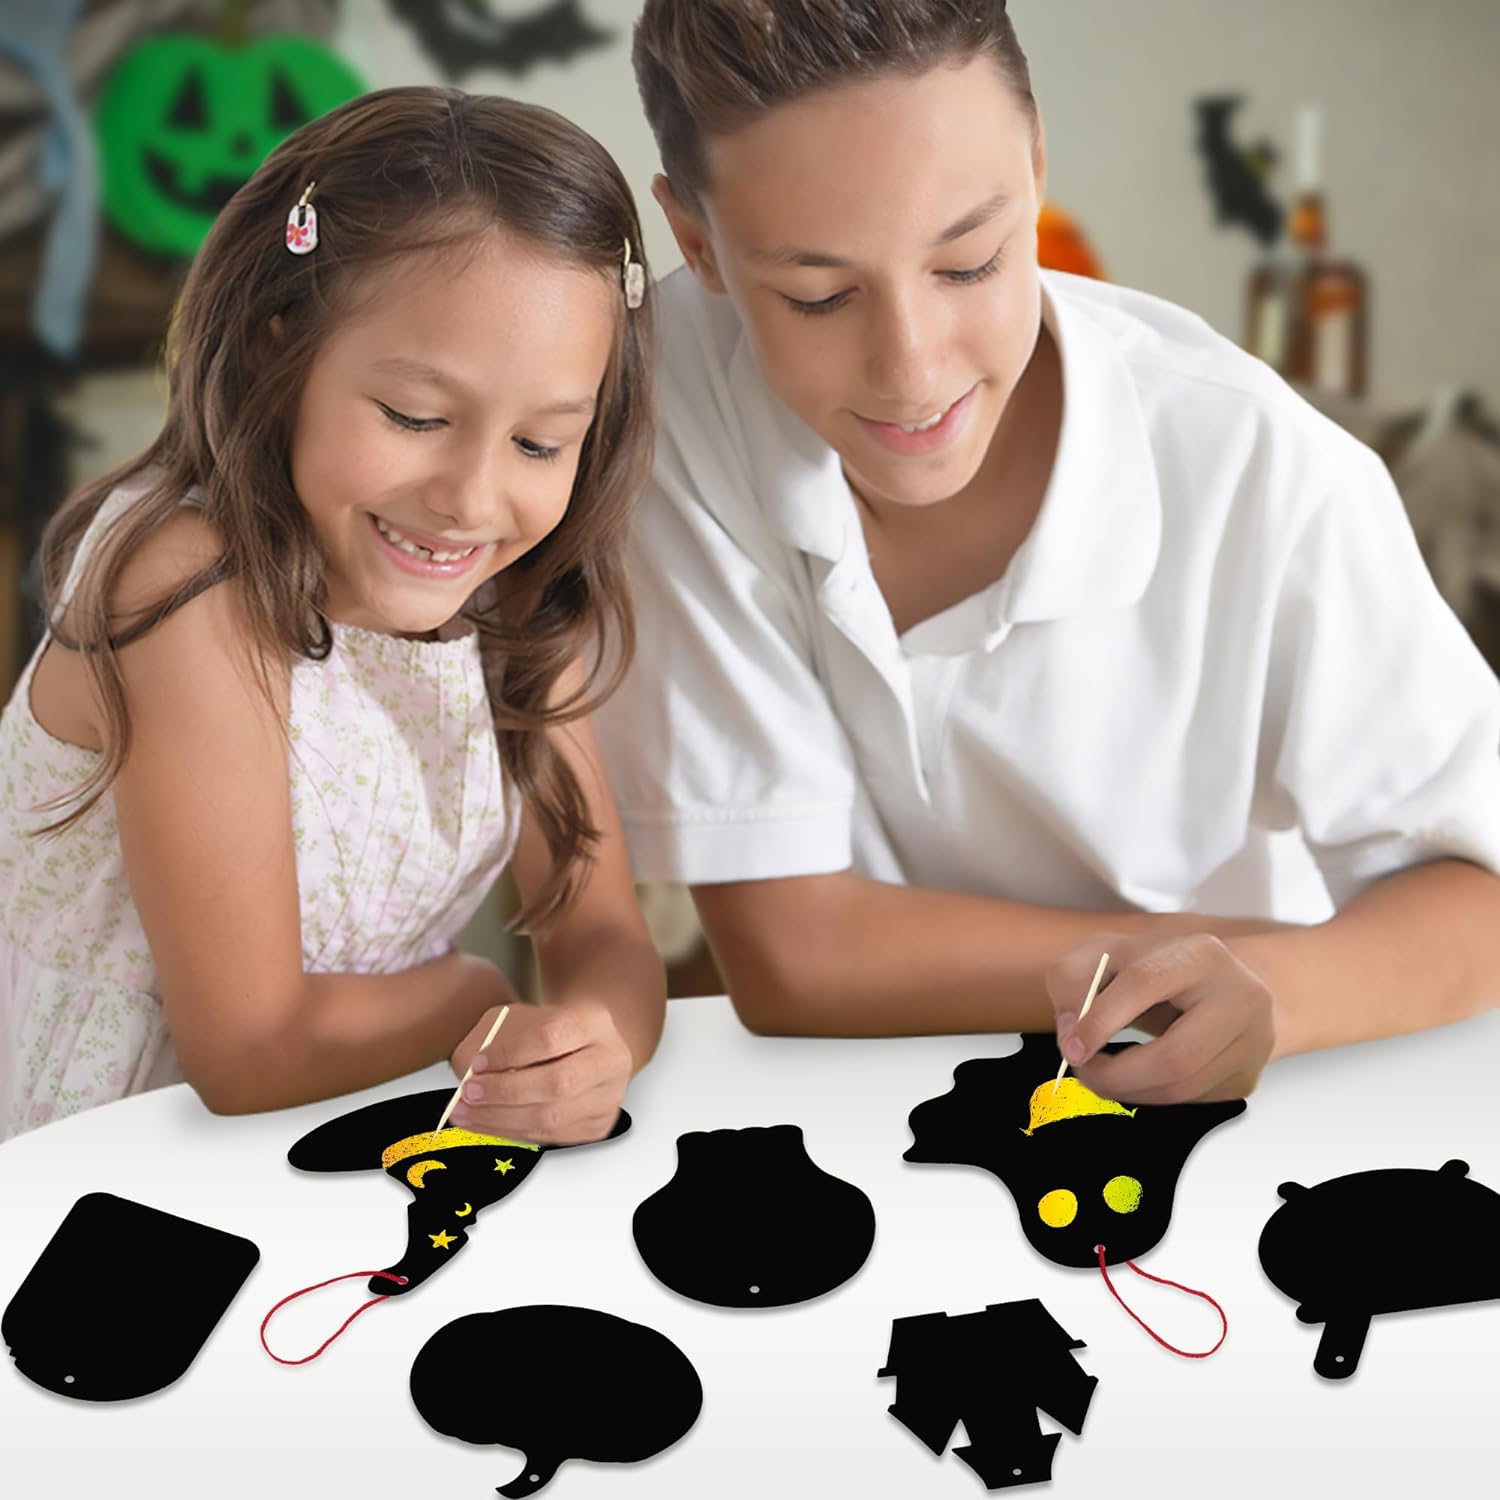 Halloween Scratch Art for Kids - 60 Sets of Scratch Paper - Halloween Crafts (Bulk) with 60 Designs, 60 Sticks, & 60 Pieces of Red String